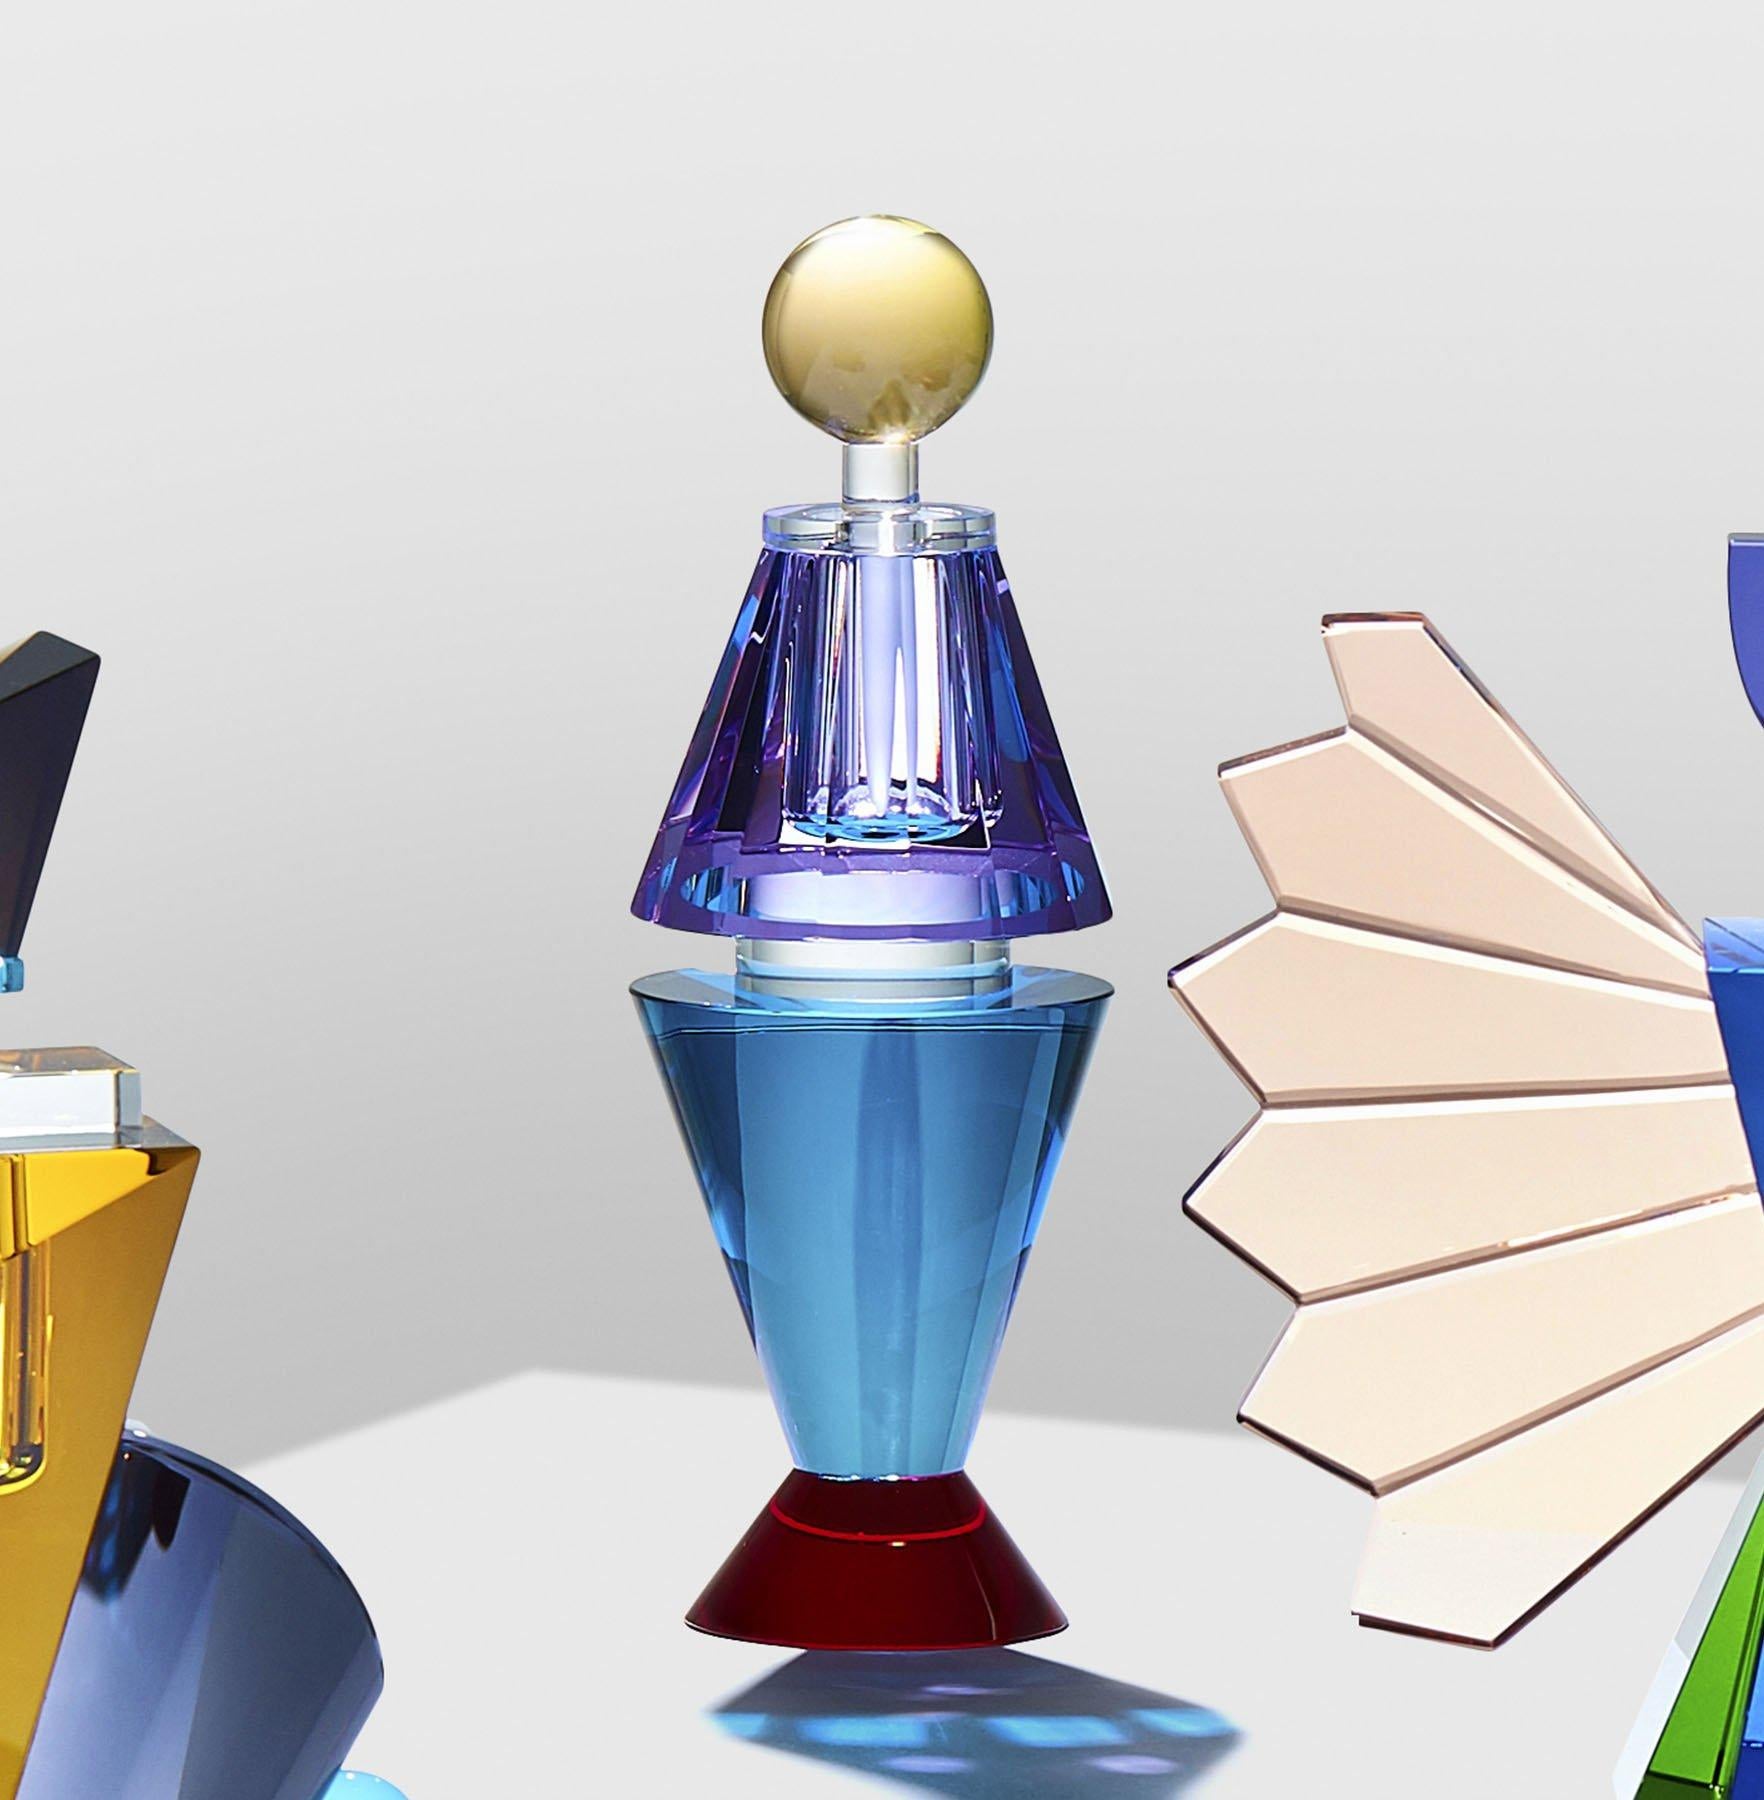 Colorful crystal perfume flacon, hand-sculpted contemporary crystal
Hand-sculpted in crystal
Measures: Small
Height 20 cm
Width 7 cm
Depth 7 cm
Weight 0.8 kg
Material: fine handcut crystal

The collection has 4 fine handcut crystal perfume